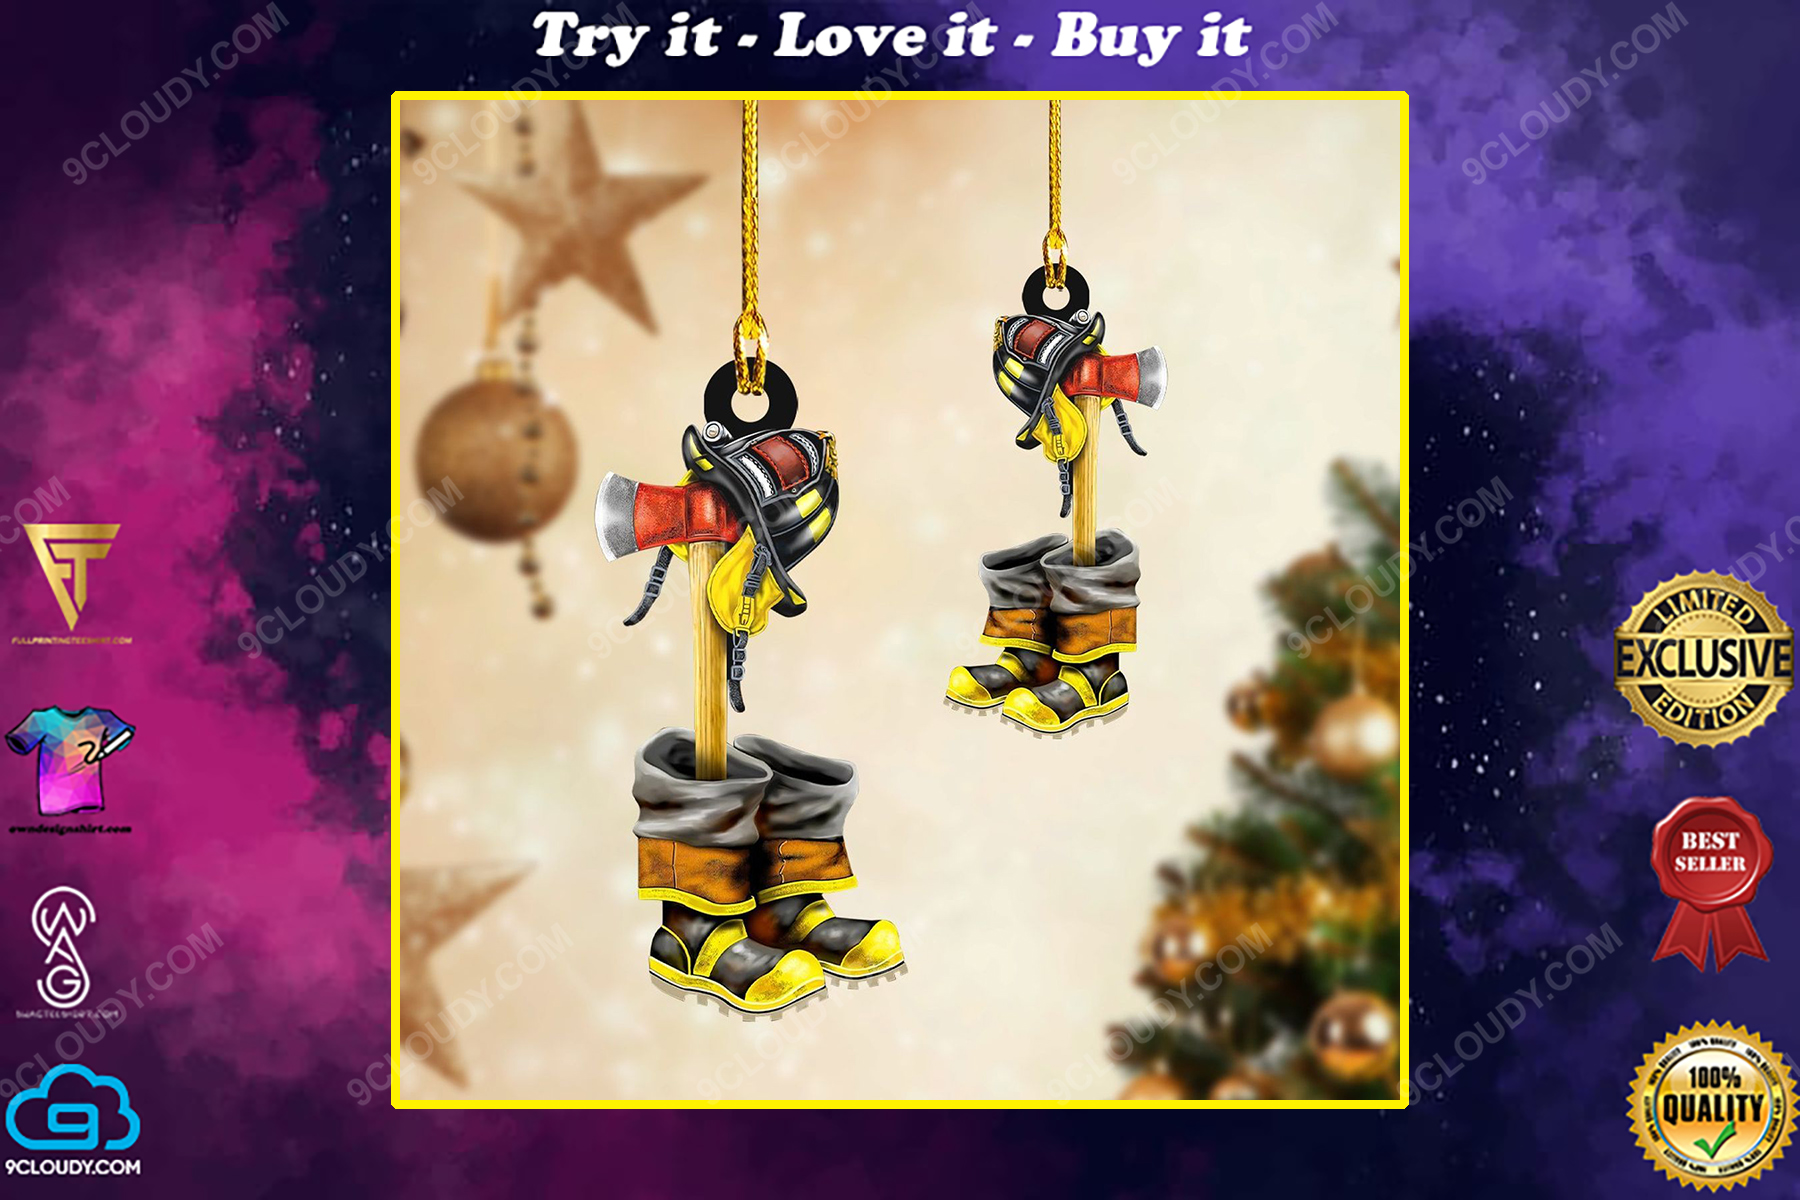 Fire ax and boots firefighter christmas gift ornament